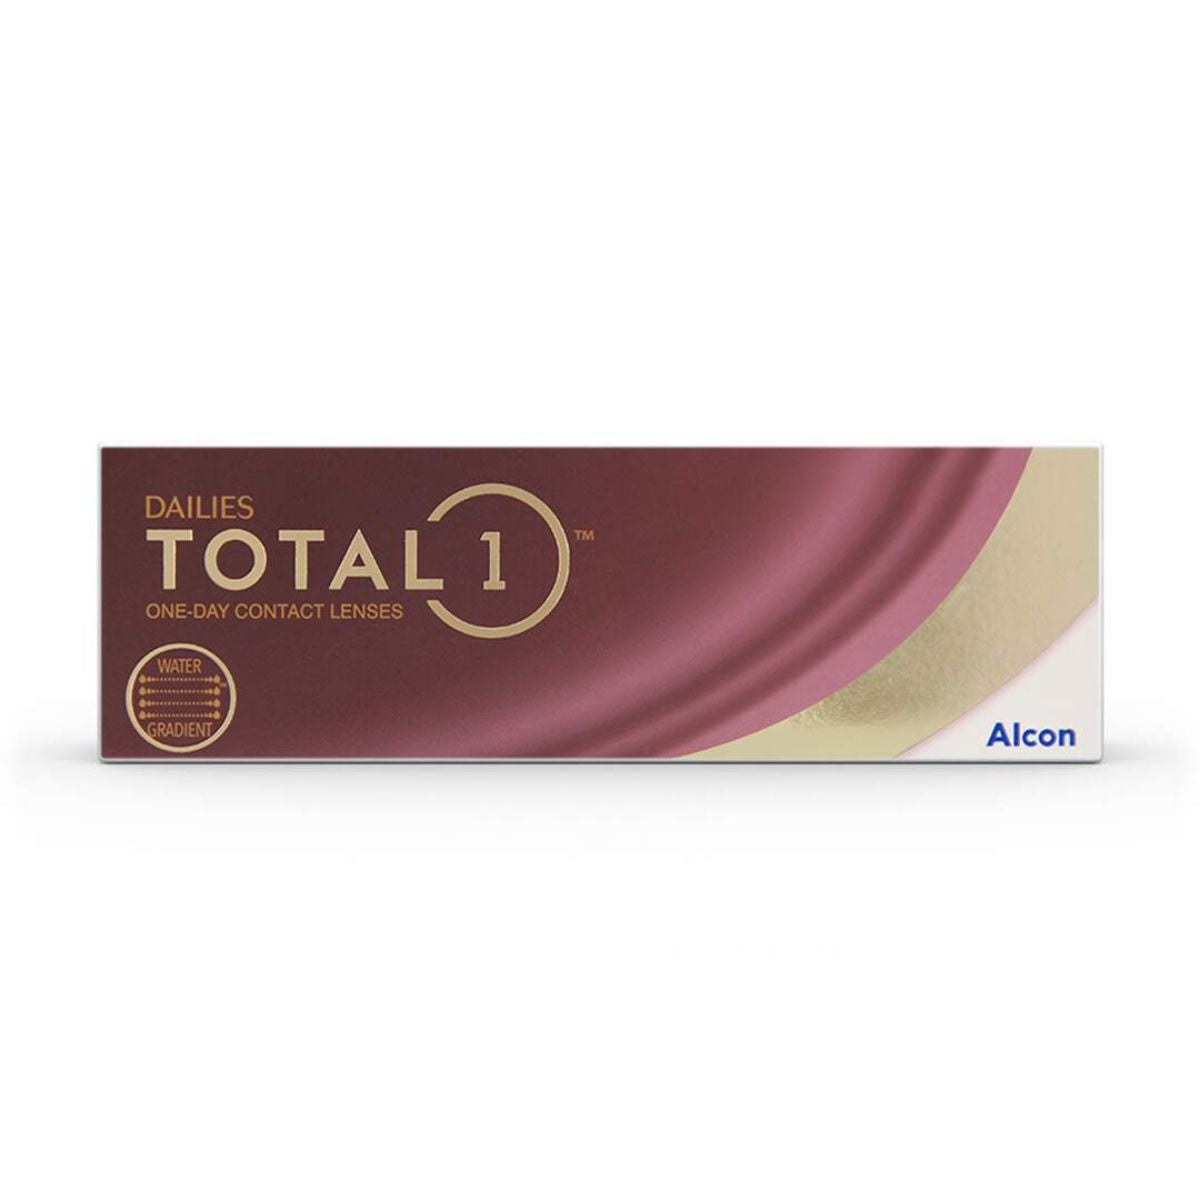 Dailies Total 1 - One Day Contact Lenses